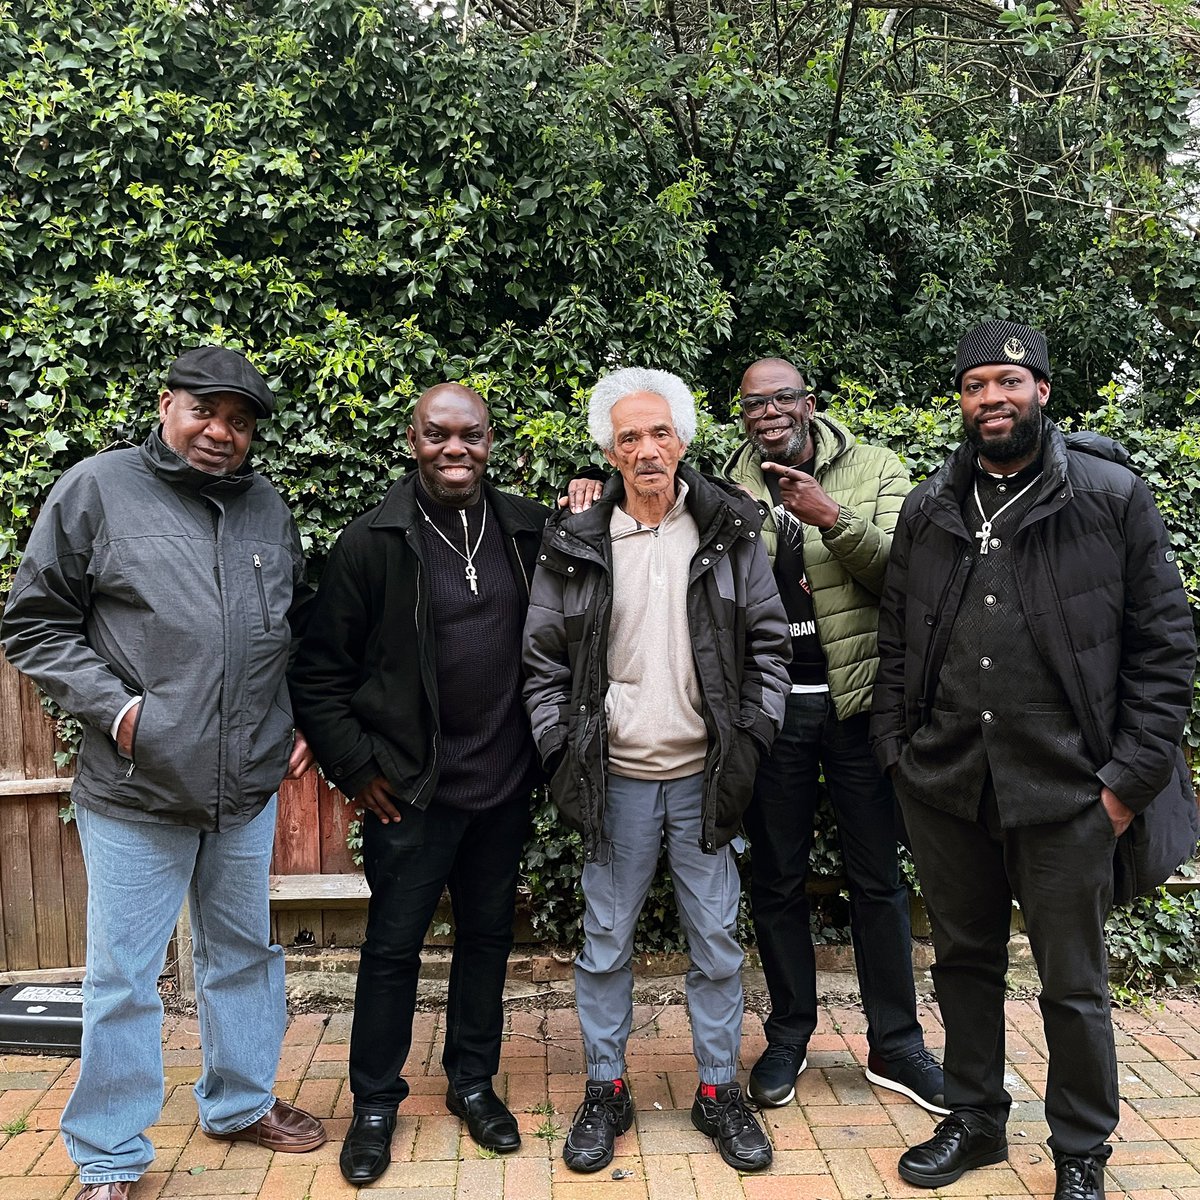 #Atonist brothers taking the time out to visit one of our elders in #Luton .

Elder Keith (centre) was in good spirits and grateful for the visit. We look forward to spending more time with him again.

#Atonism #AtonismRising #AtonistMen